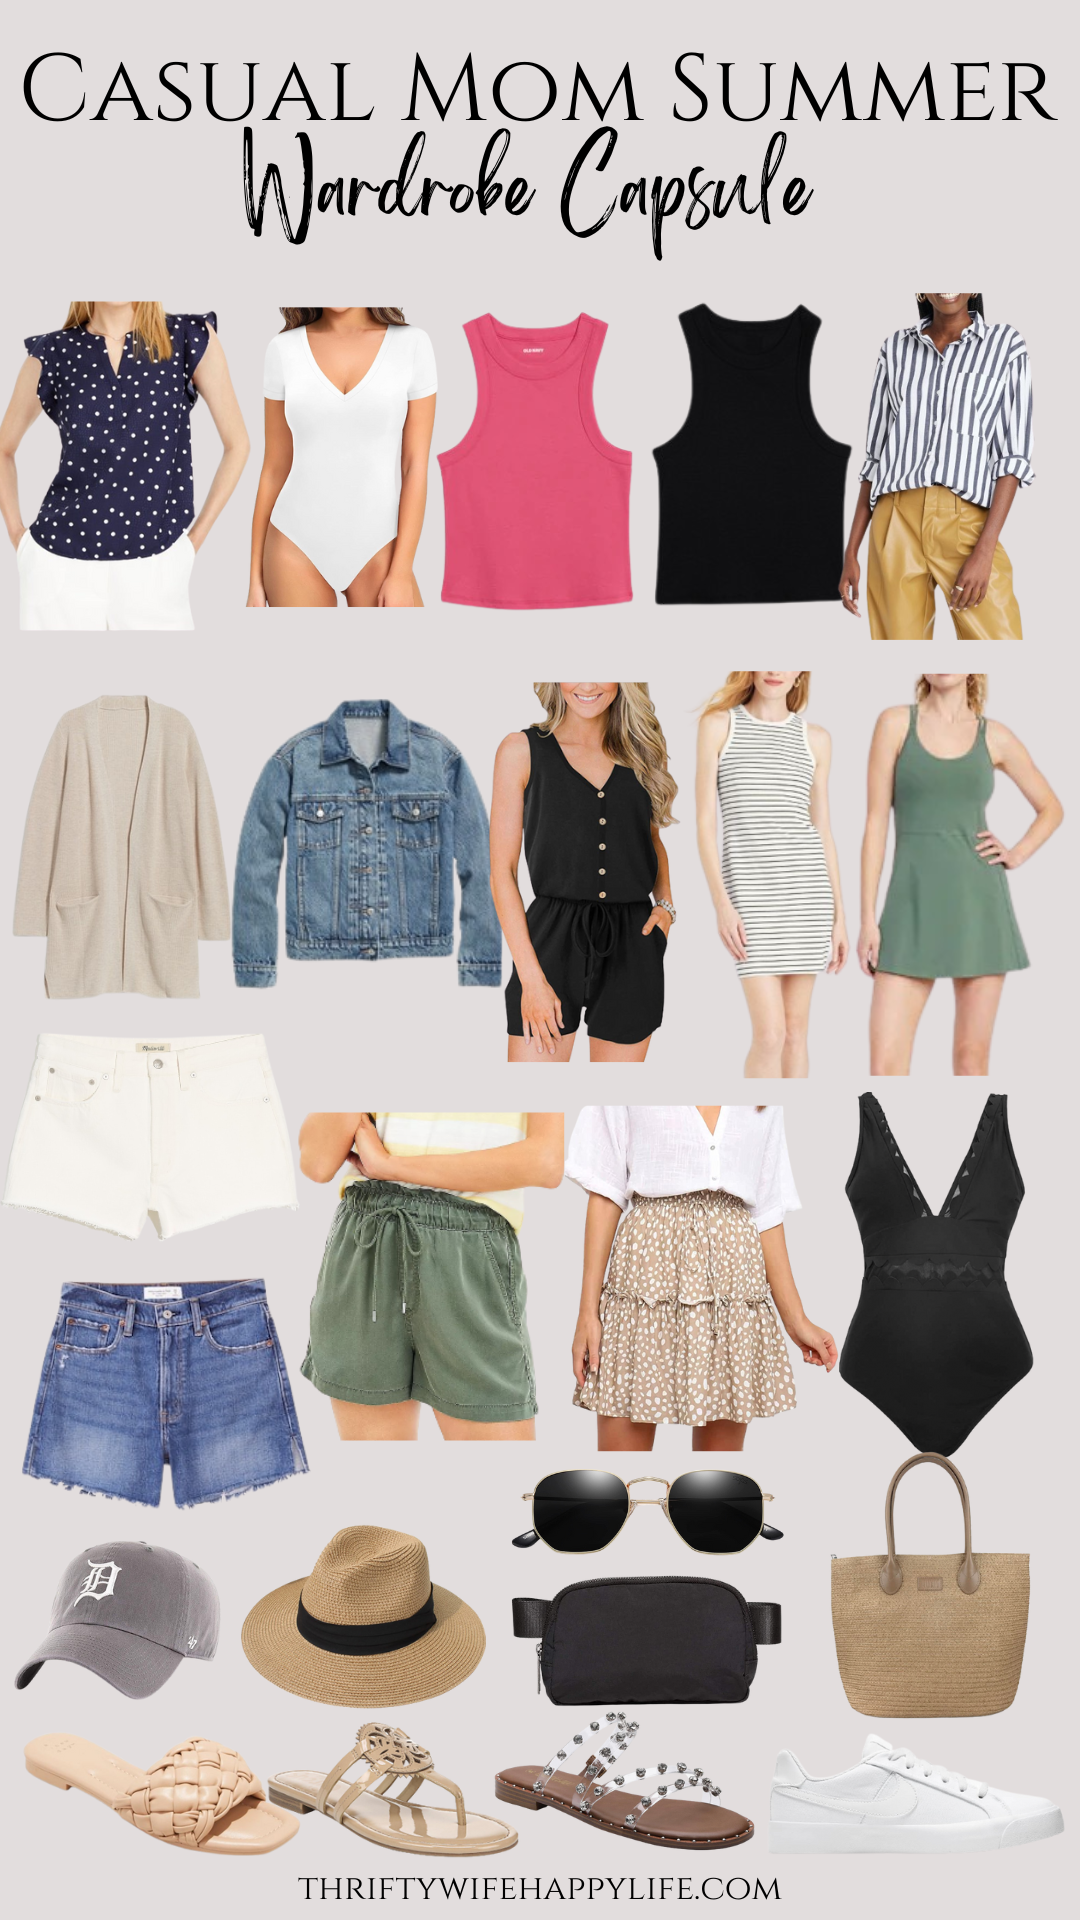 Affordable & Fun: Outfit Inspo For All Your Summer Plans - The Mom